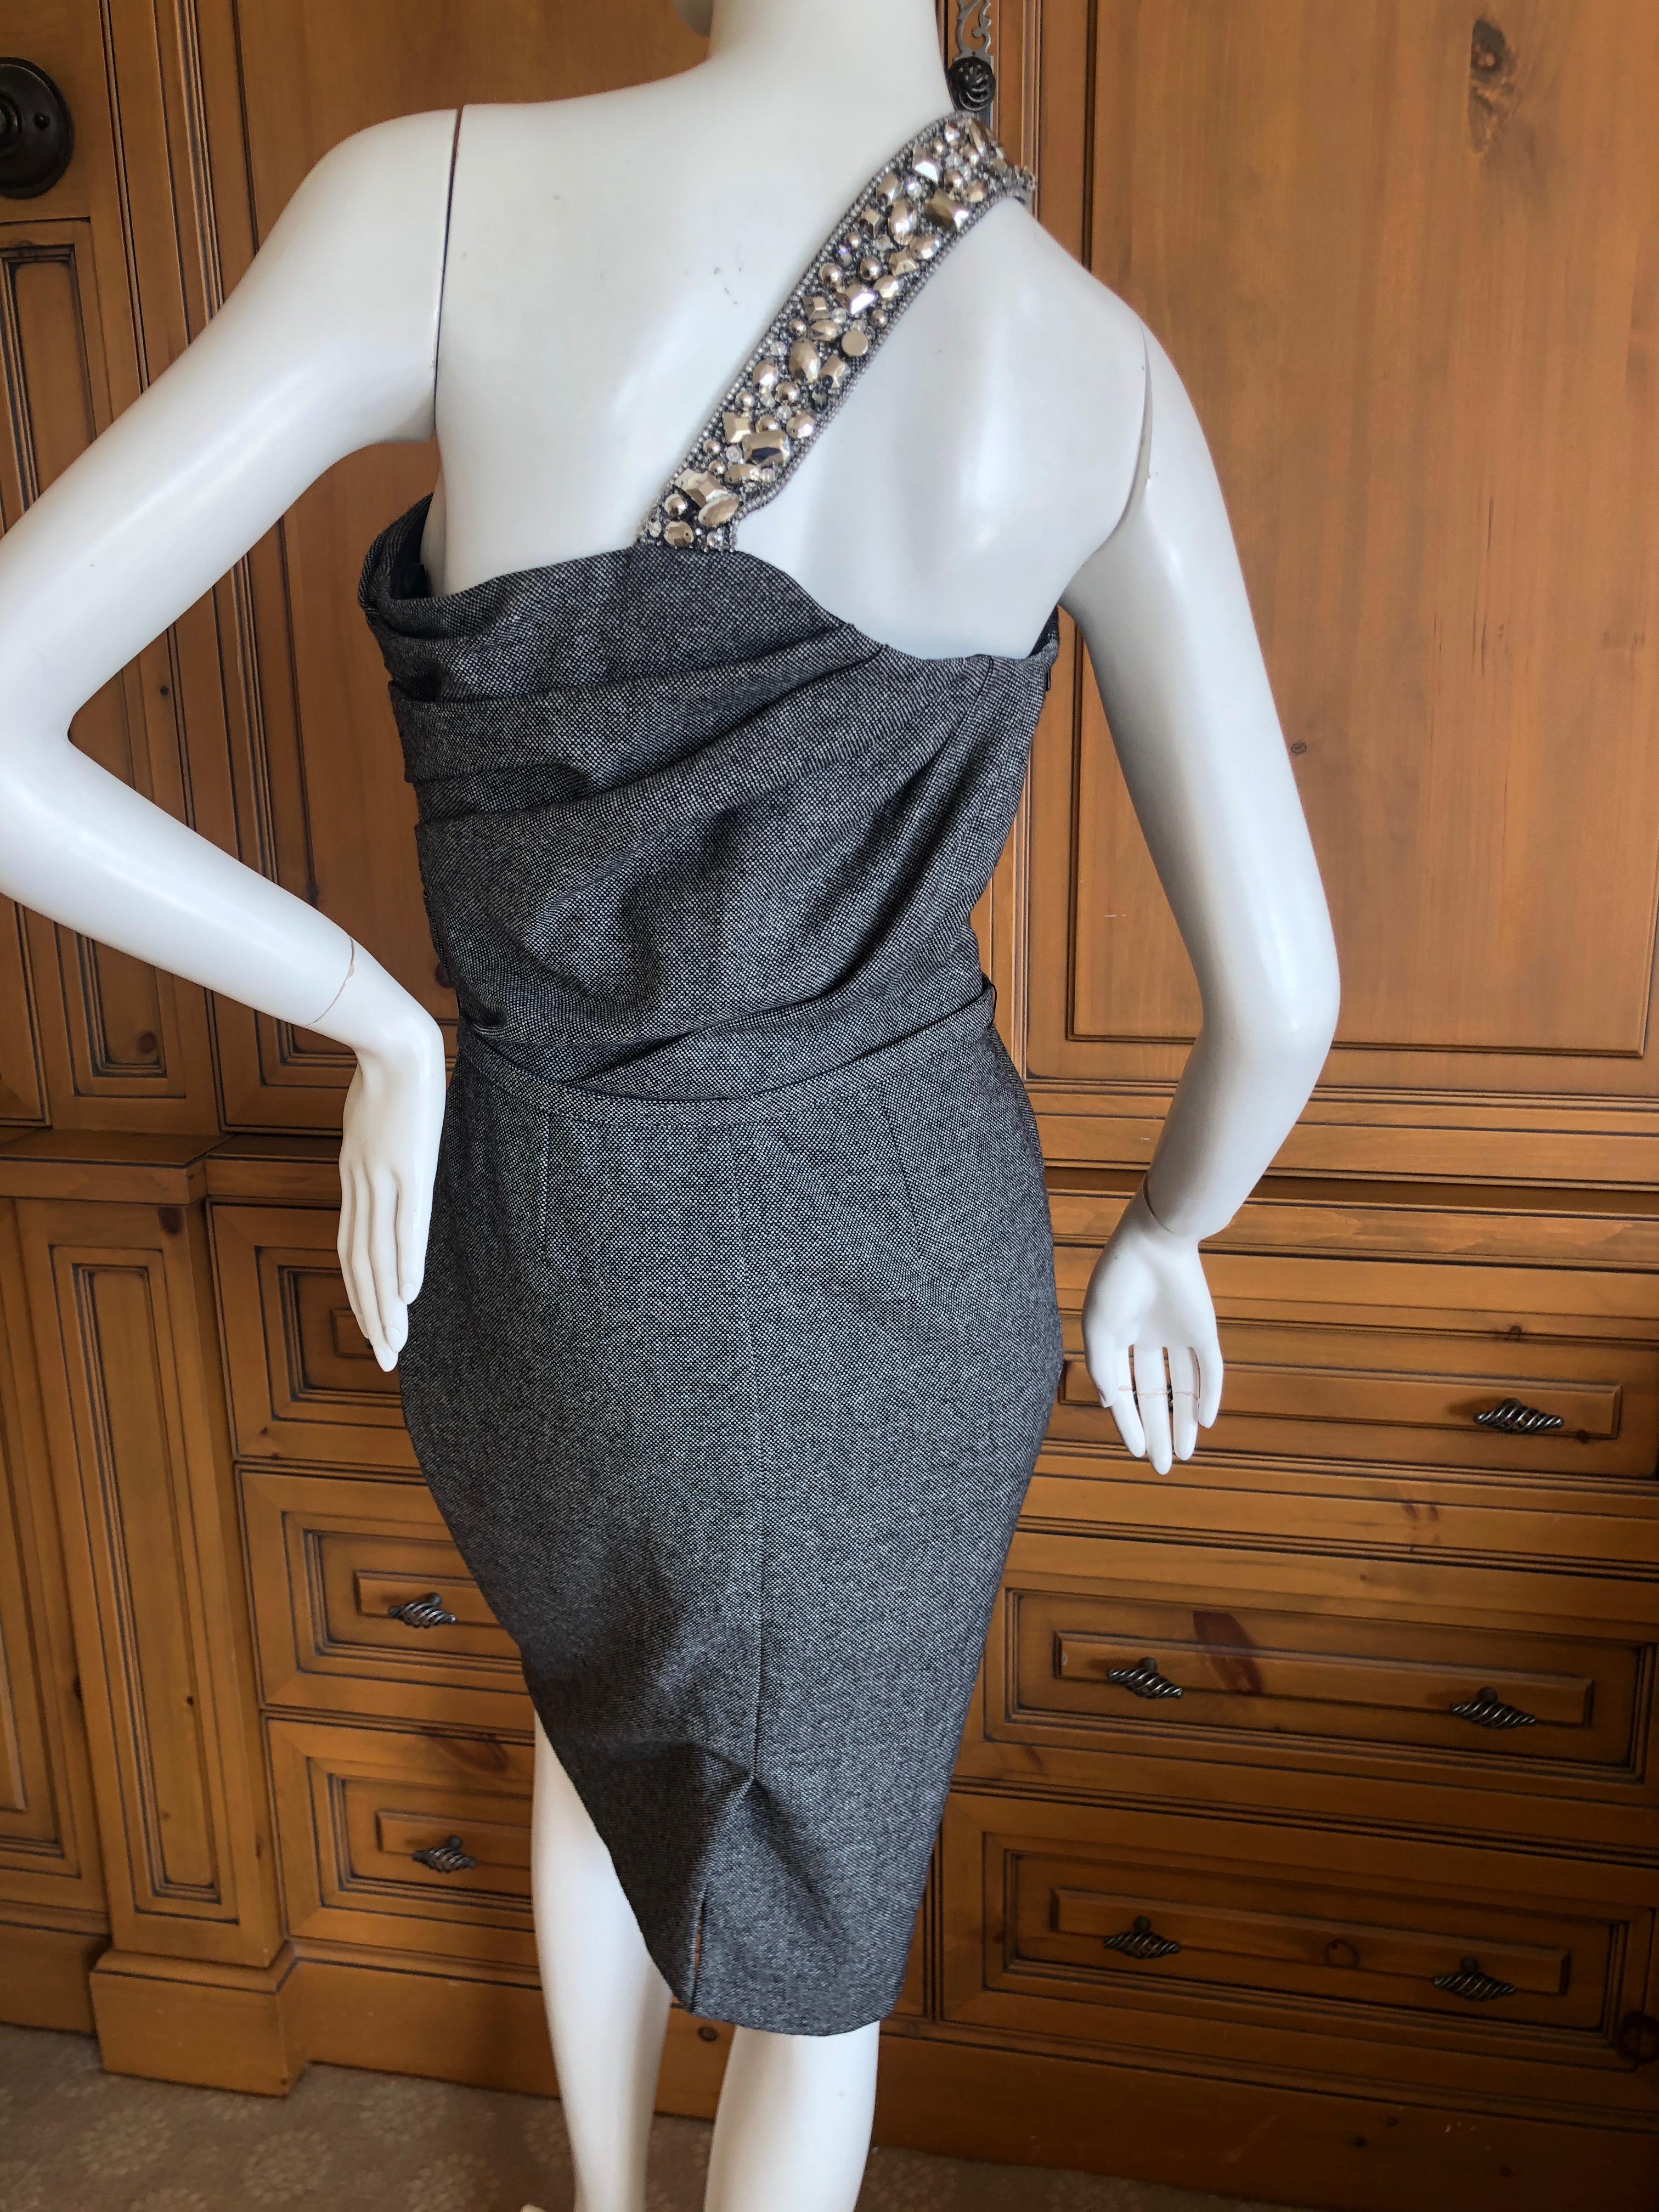 Christian Dior John Galliano Gray Tweed Cocktail Dress with Jewel Shoulder Strap For Sale 6